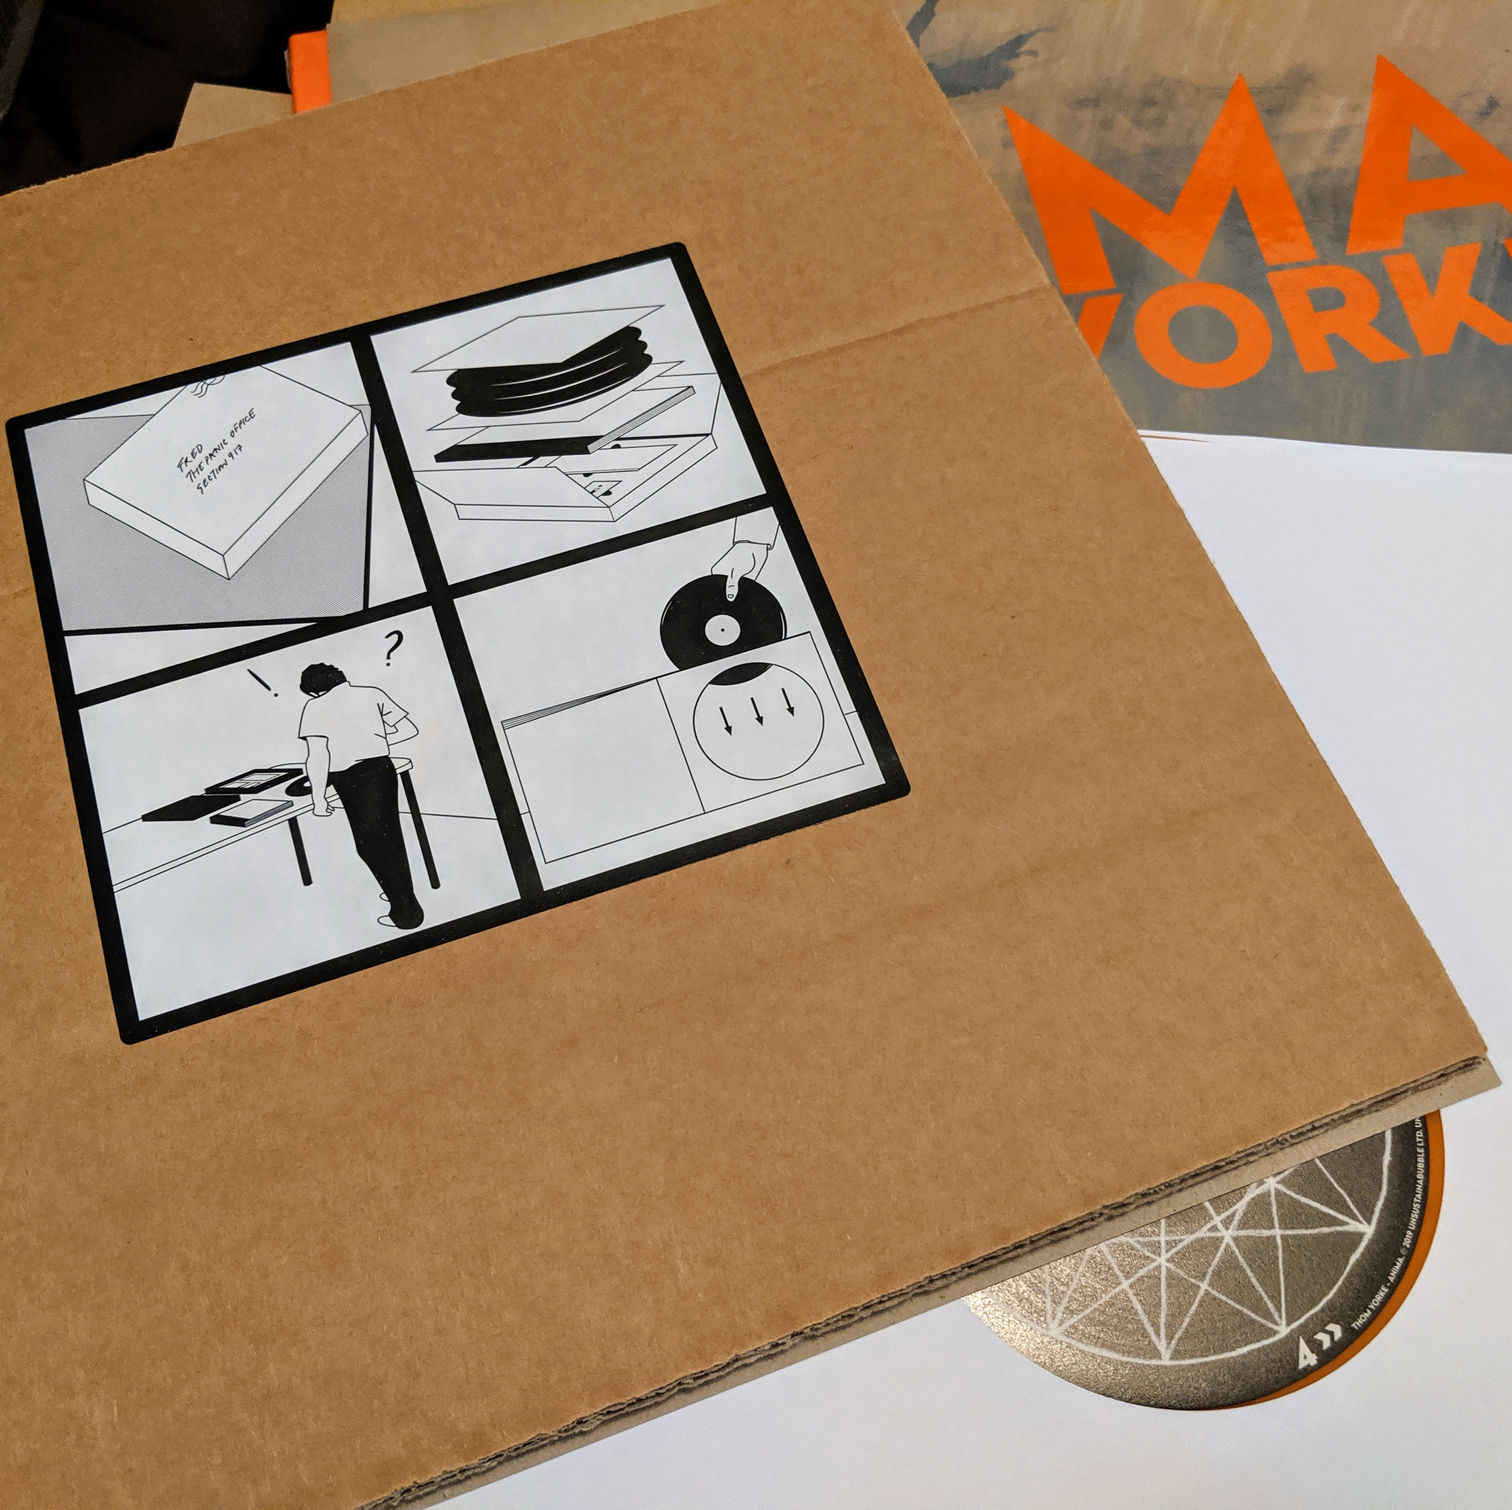 Assembly instructions with detail of Thom Yorke's Anima record packaging